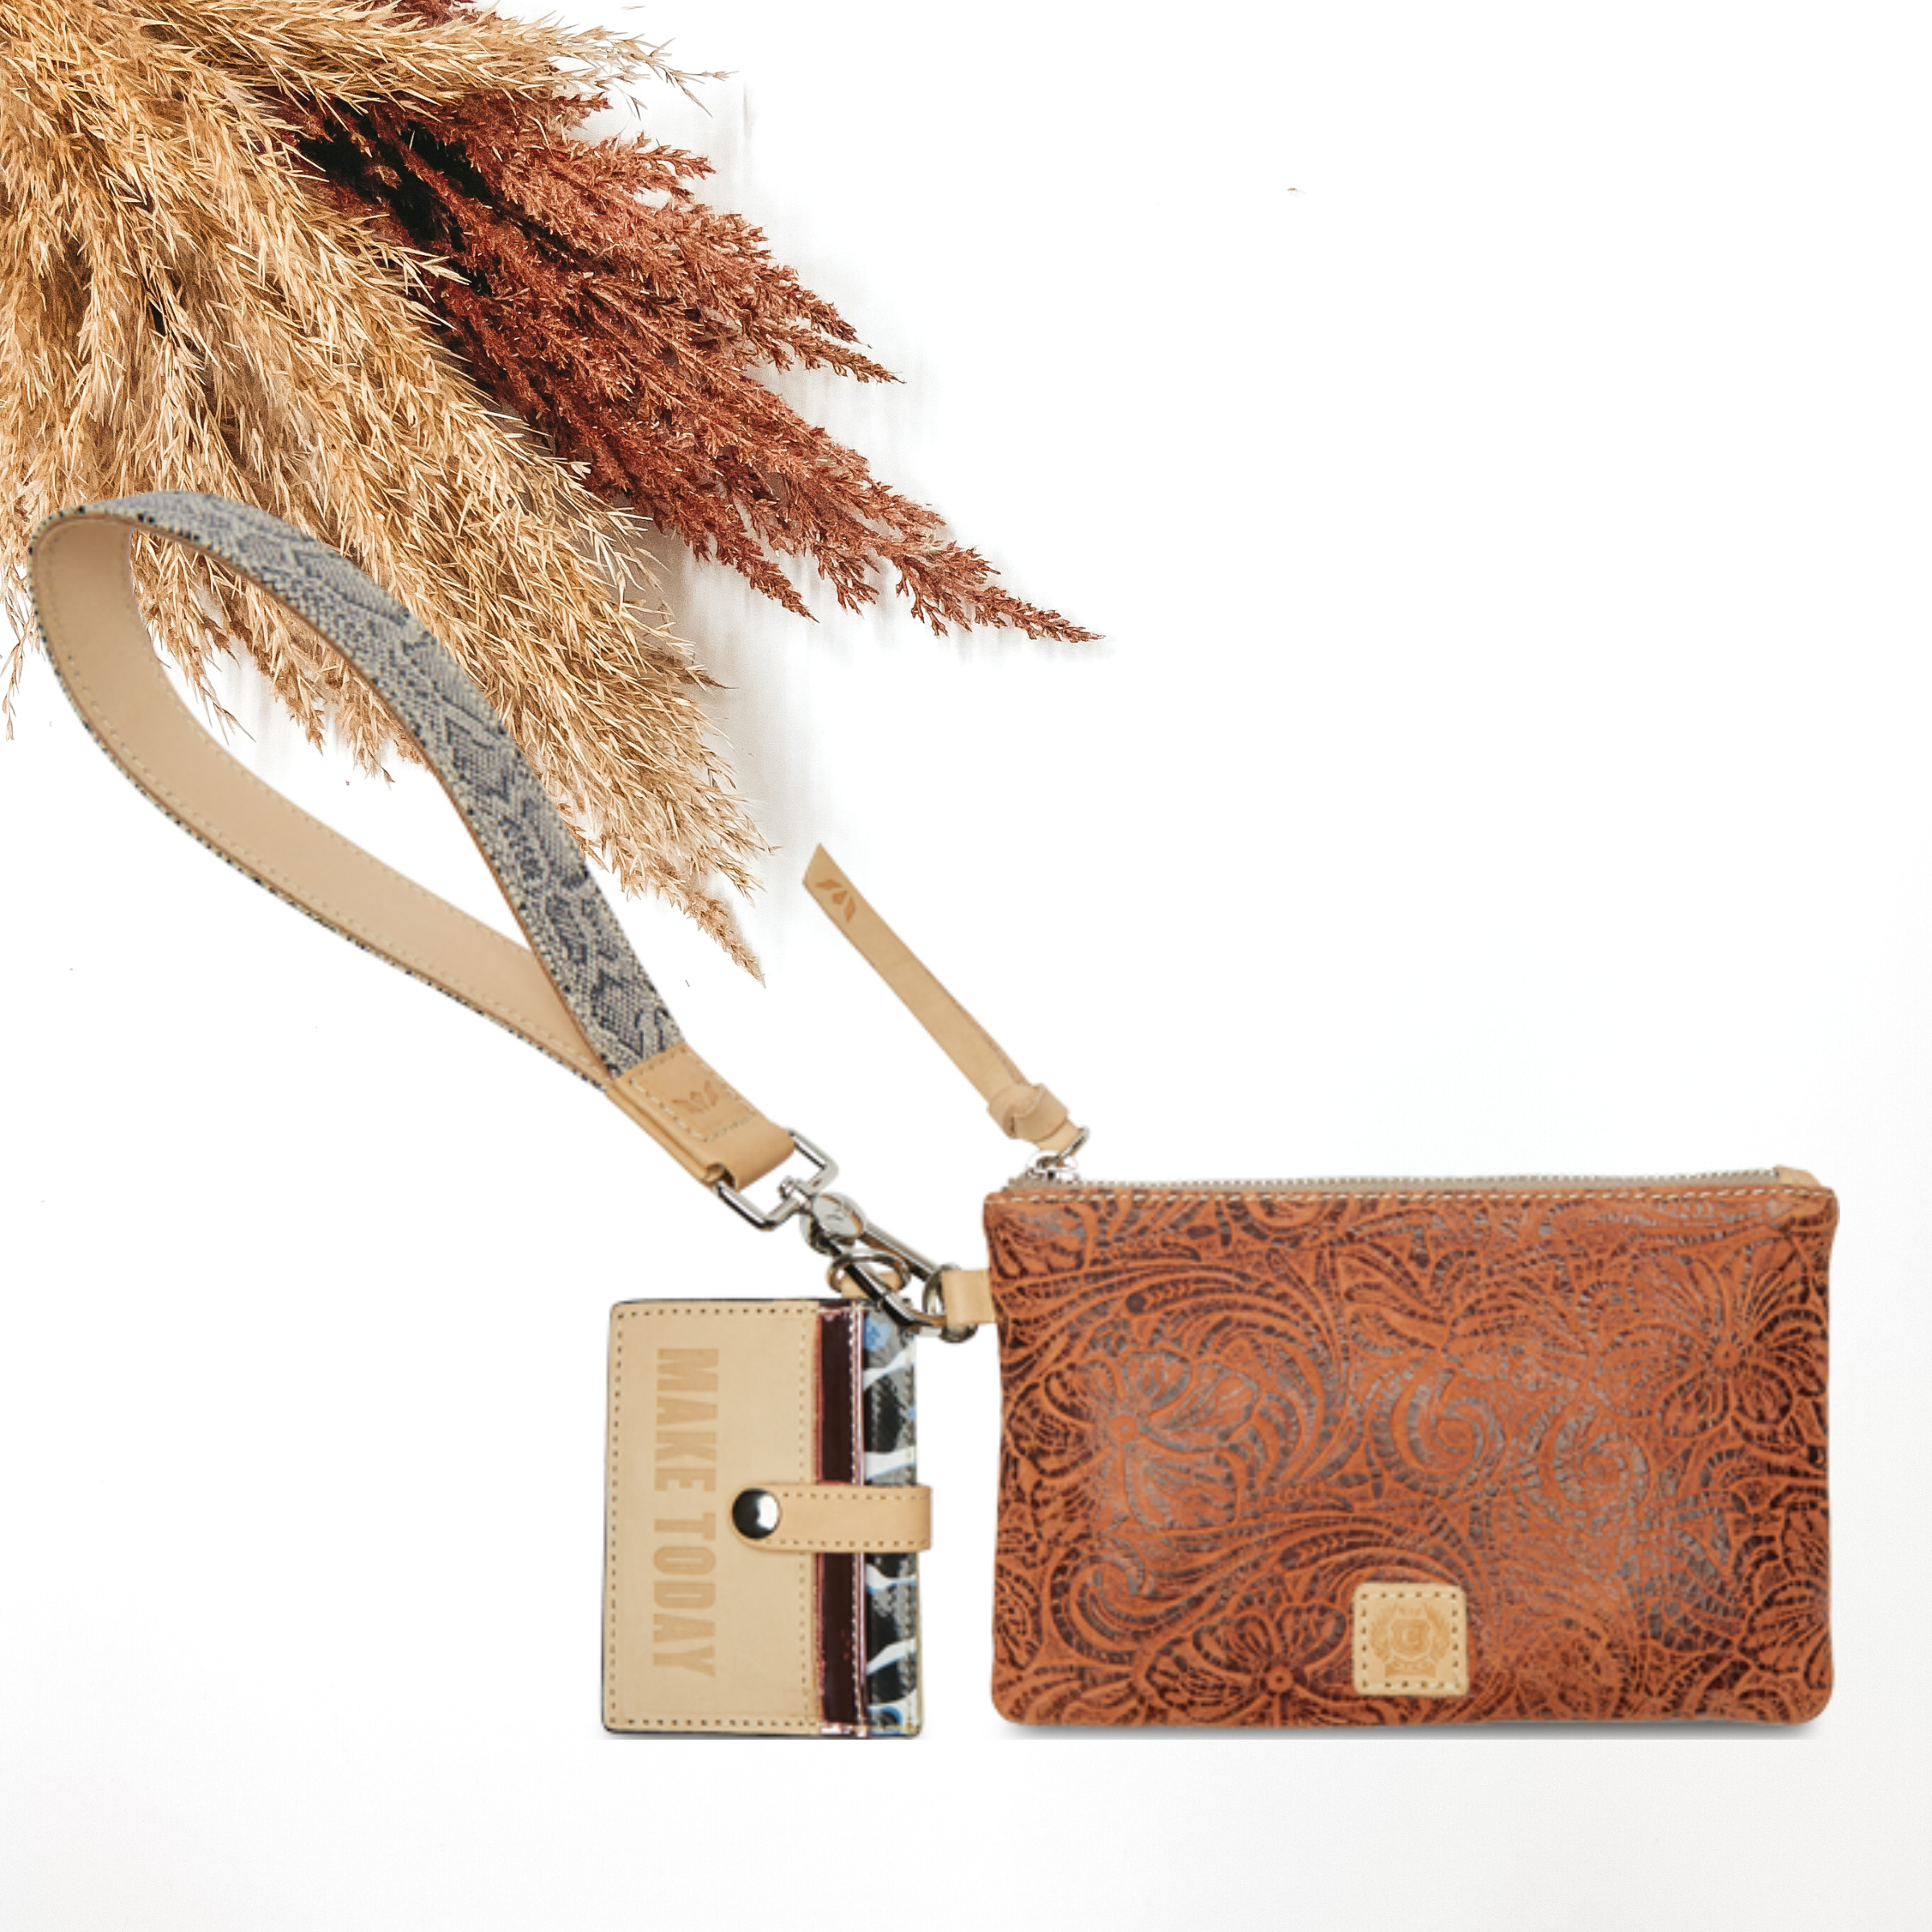 Brown leather tooled pouch with a snakeprint wristelt. This pouch also includes a card holder charm. This is pictured on a white background with tan and brown pompous grass in the background.